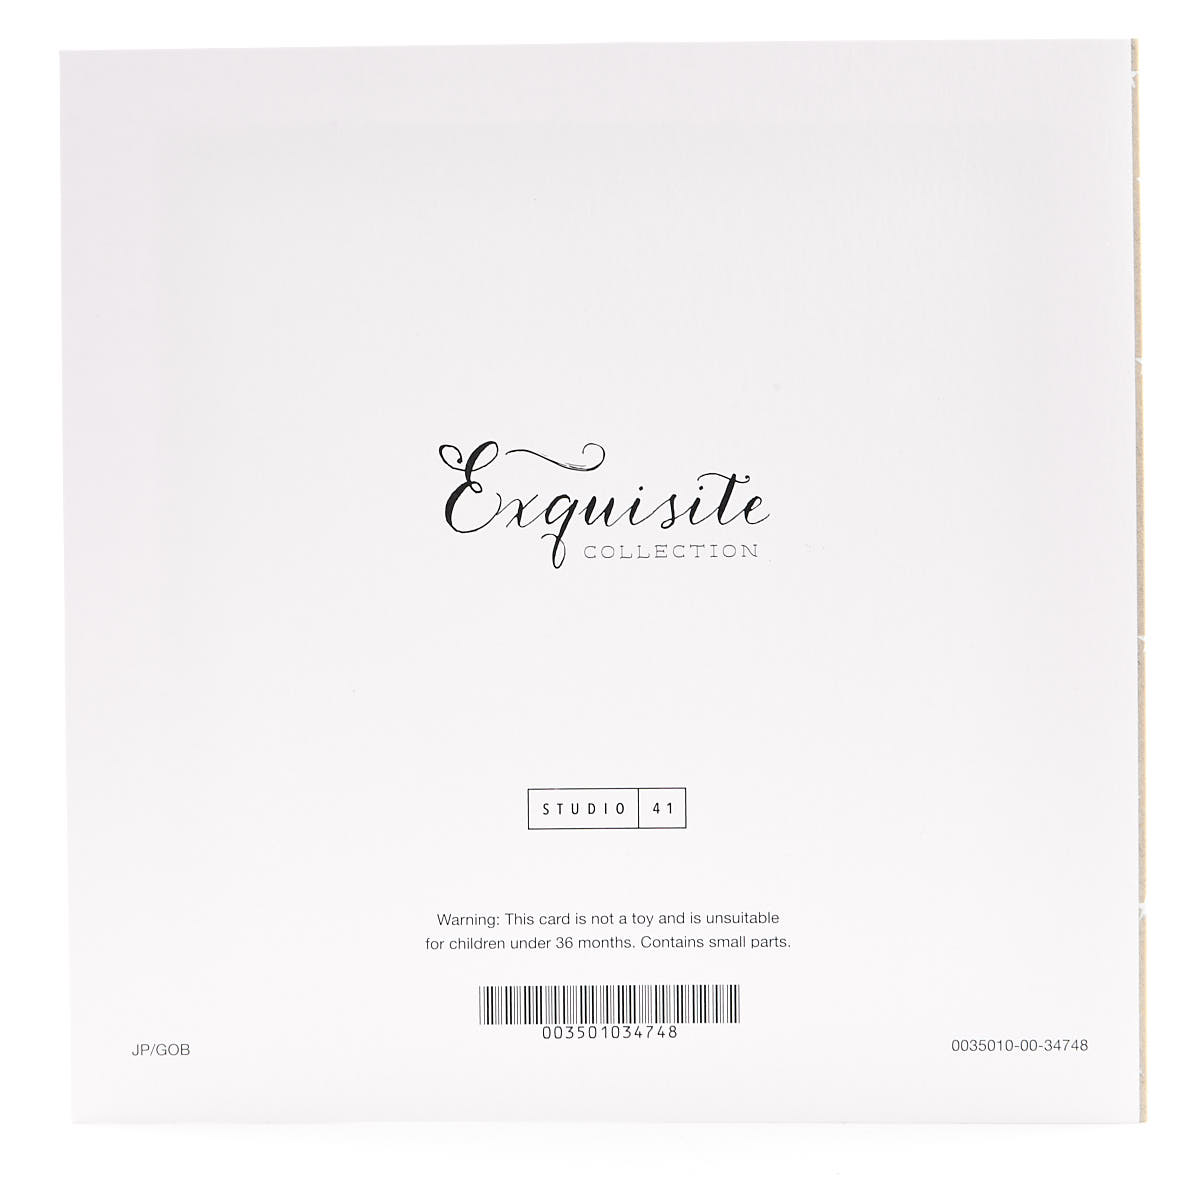 Exquisite Collection Birthday Card - Special Great Grandson